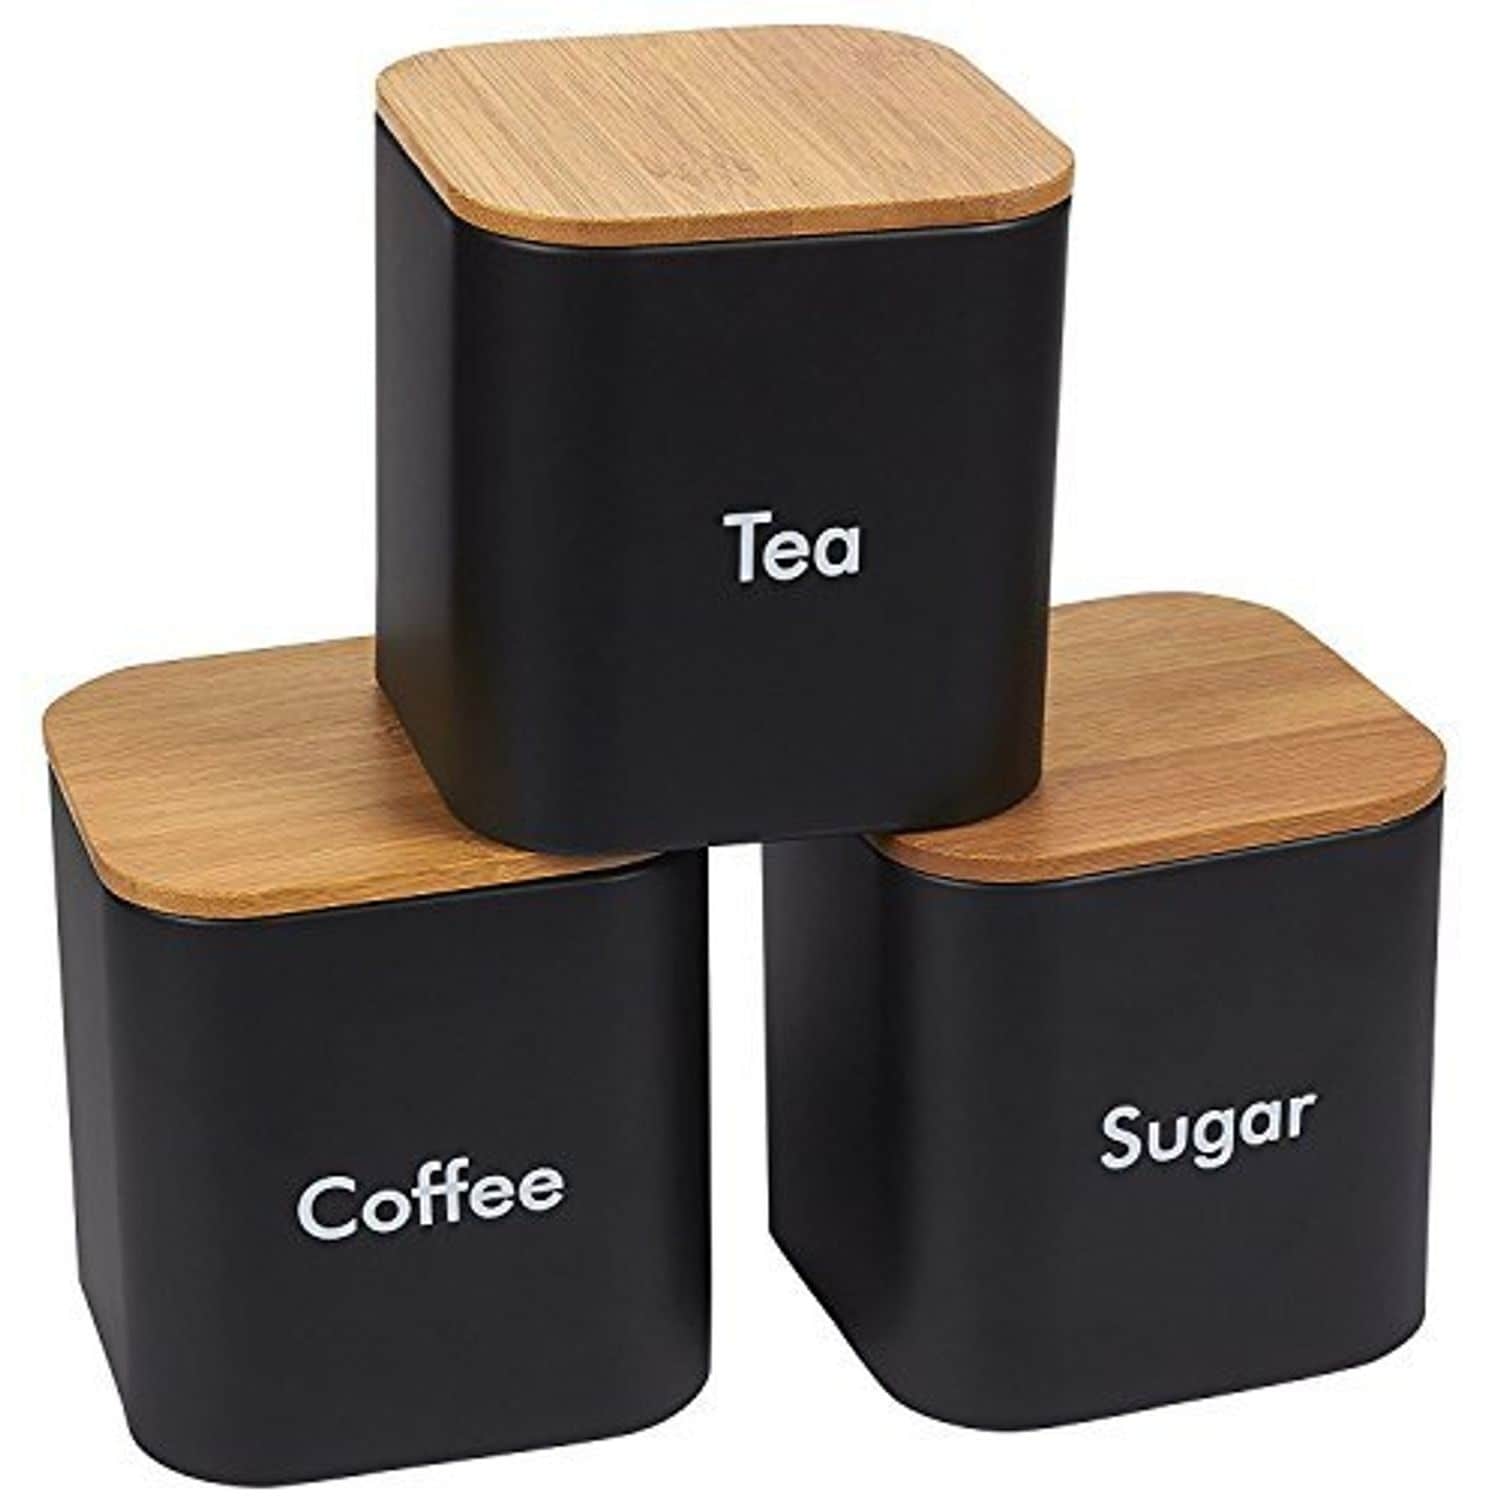 3.35.9 inch Bamboo Tea Canister Home Kitchen Loose Leaf Tea Tin for Coffee Sugar Storage Tins S 2.43.1 inch 